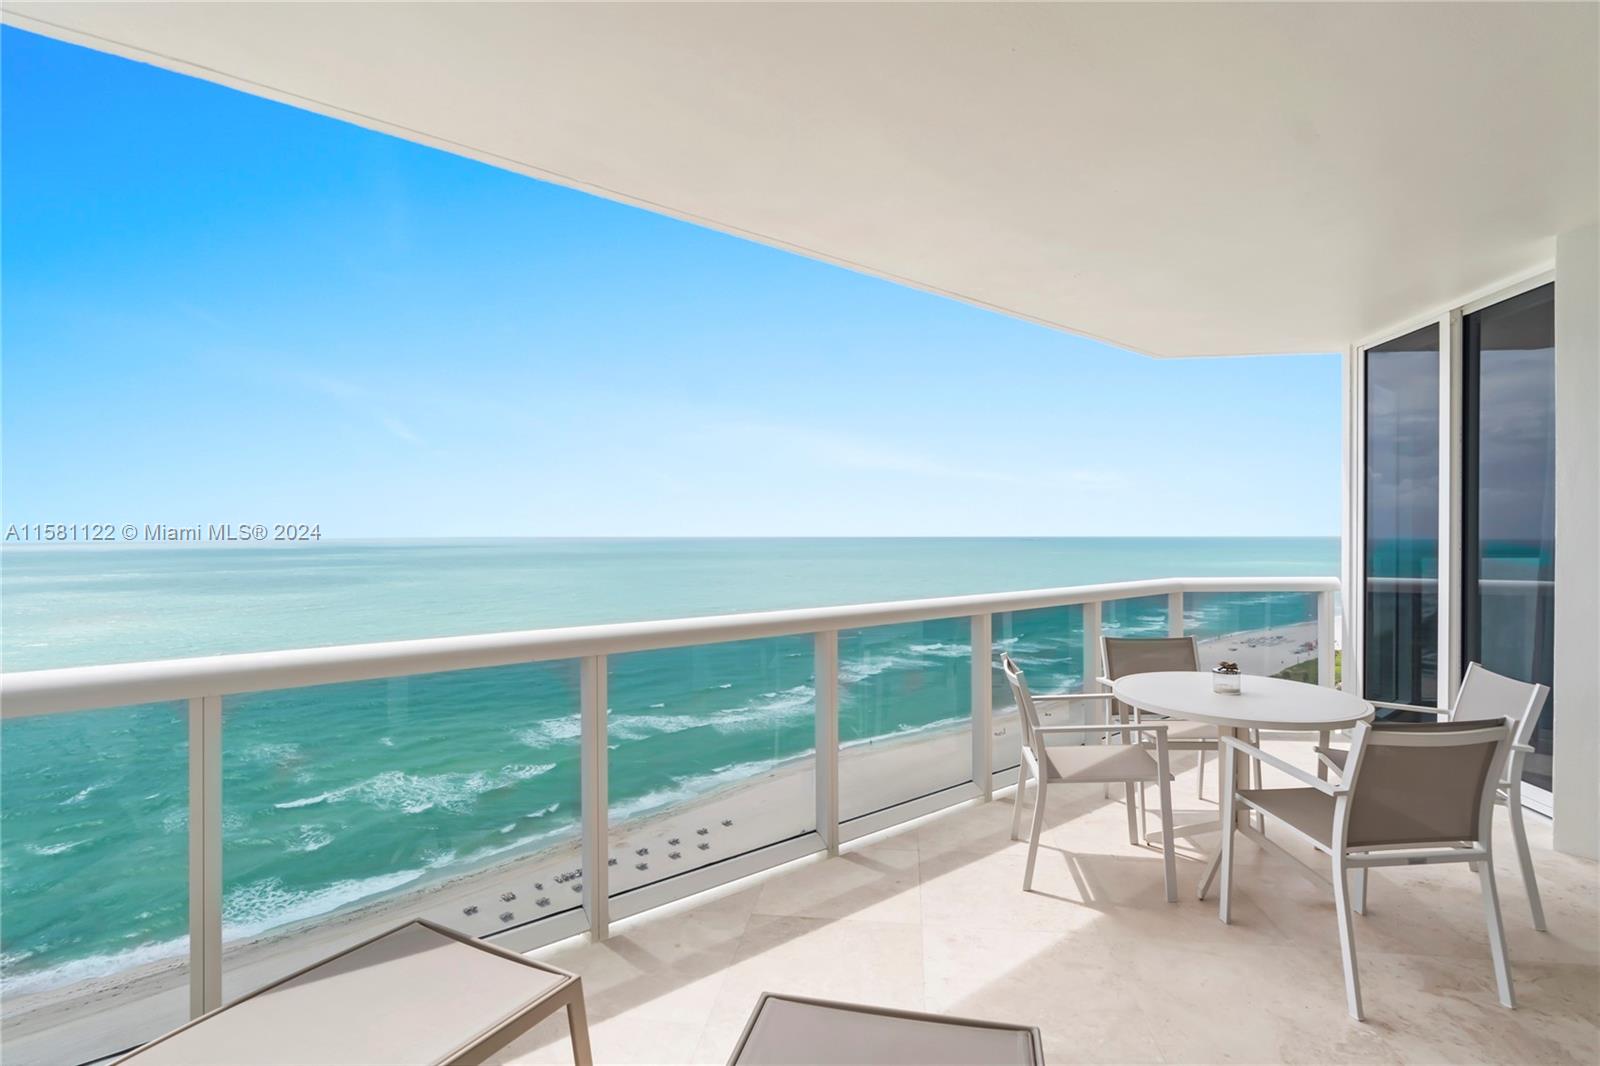 Enjoy oceanfront living at it’s best from this 2BR/2BA apartment on the 21st floor. This beautiful residence faces East with panoramic spectacular direct ocean views and offers 1,530 SF, marble baths, open kitchen w/granite countertops, large terrace & floor to ceiling glass windows. Building offers 1st class amenities: tennis court, large pool + towel service, gym, cafe/market, room service, business center, clubhouse, spa, steam rooms, saunas, personal trainers, free exercise classes, in/outdoor hot tubs & much more! Click the virtual tour link to see video of property.